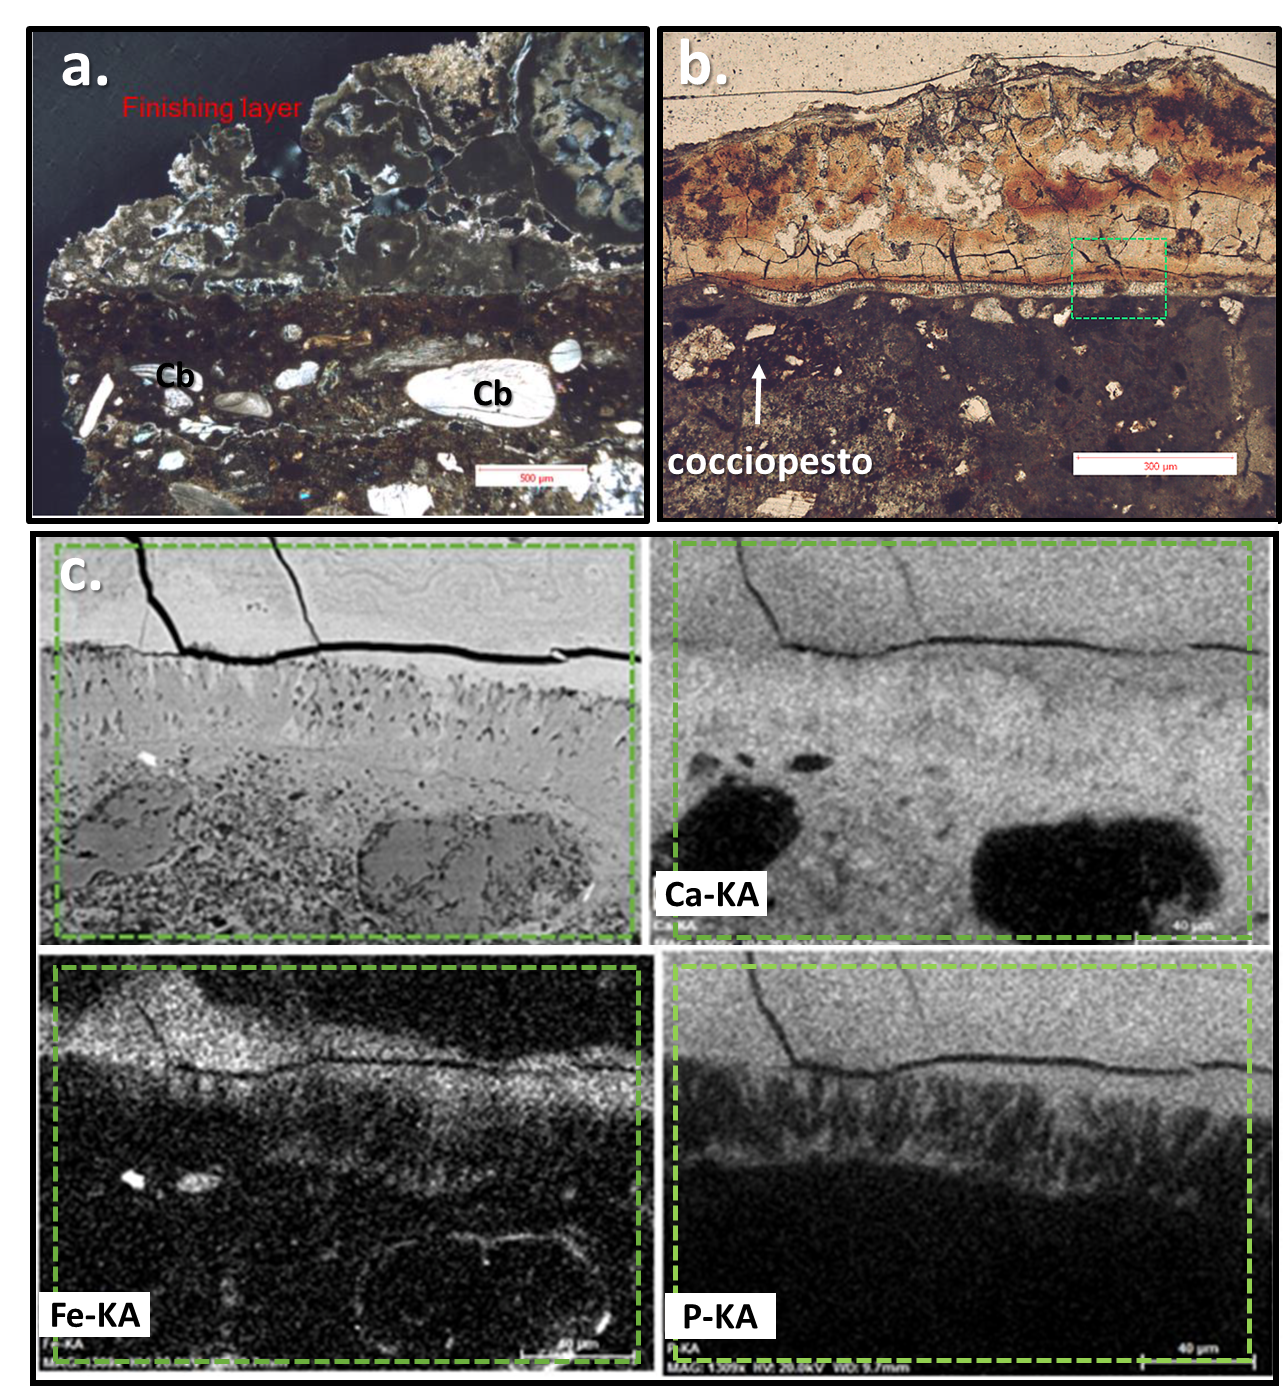 Figure 4. Micrographs showing: a. PLM (xpl) of plaster sample, the calcite finishing layer shows an irregular and porous surface, rich in dissolution and recrystallization phenomena. Presence of carbonate fraction (Cb) within the aggregate; b. PLM (ppl) of plaster sample, collected from the cistern, showing the external altered layer. A fragment of cocciopesto is highlighted by a white arrow. The secondary calcite, re-crystallized within the interface between the mortar and the external layer, is more evident under the ESEM microscope c., where also the presence of iron and phosphorus is detected by EDS maps (analyzed area is indicated by the rectangle, with dashed line, within b. and c.).